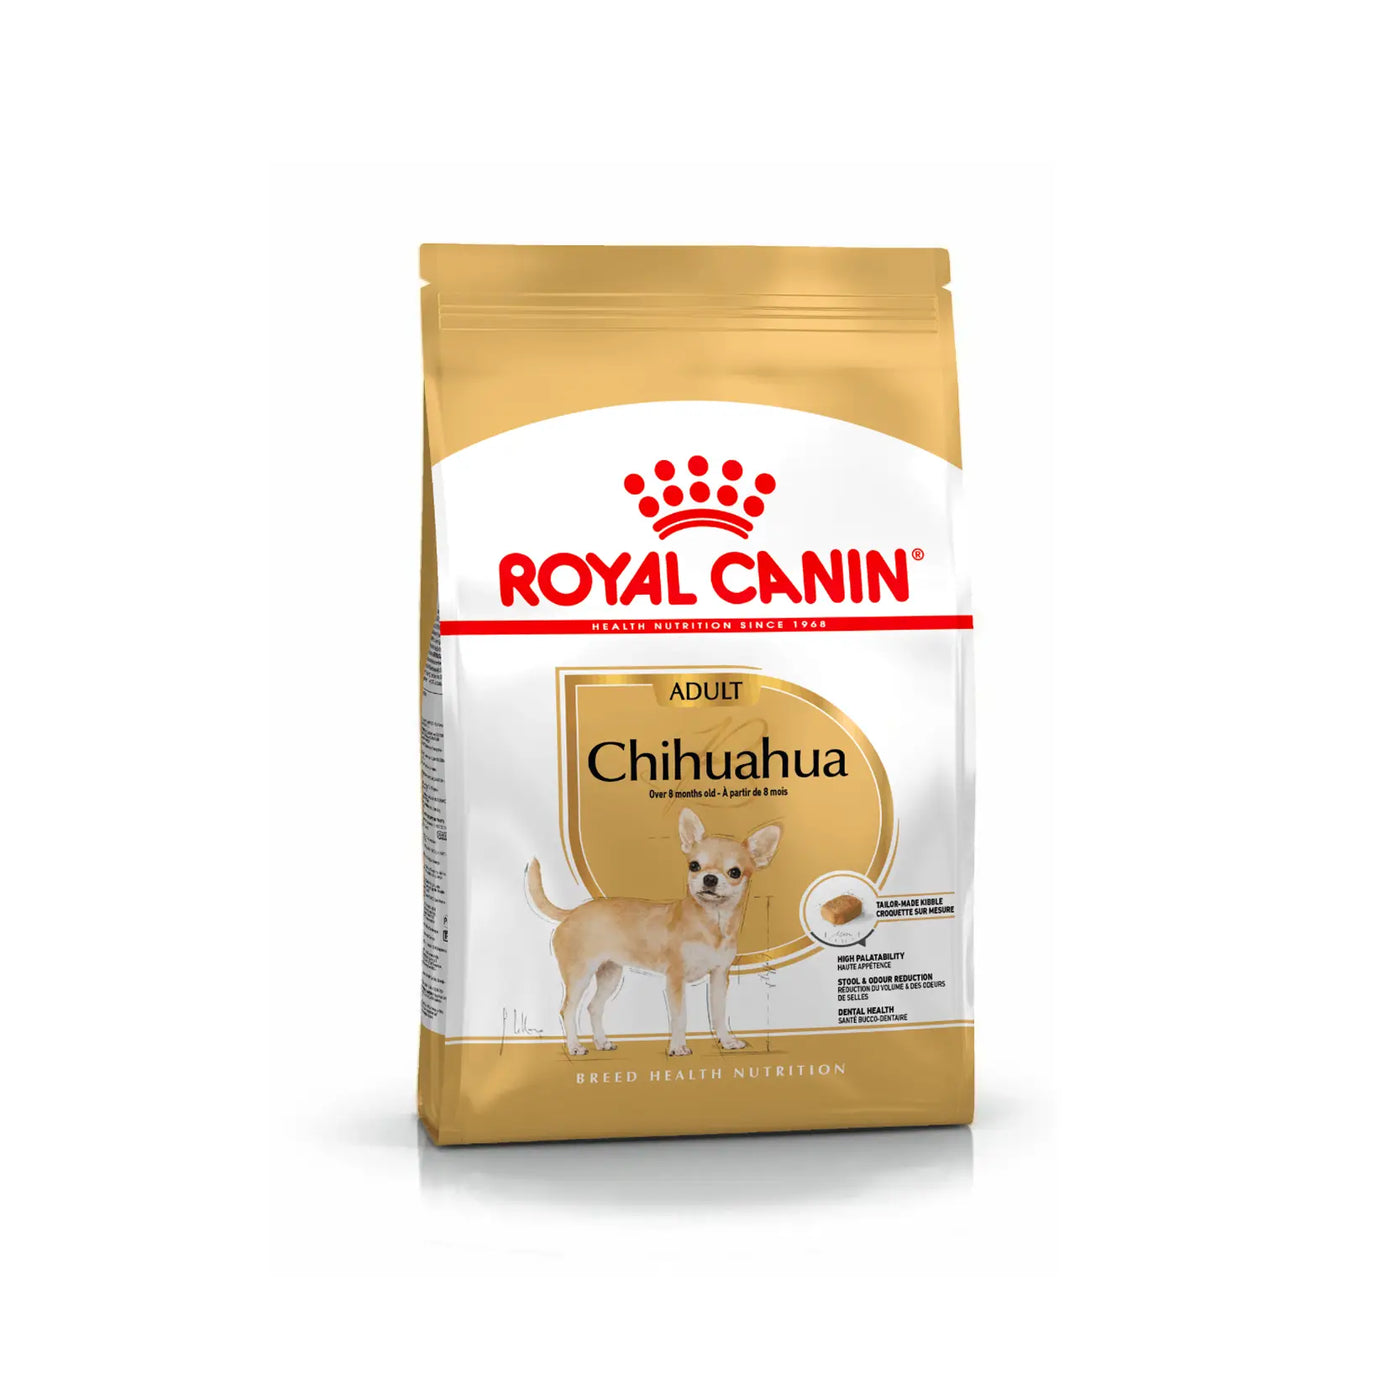 Royal Canin - Chihuahua Adult Dry Food